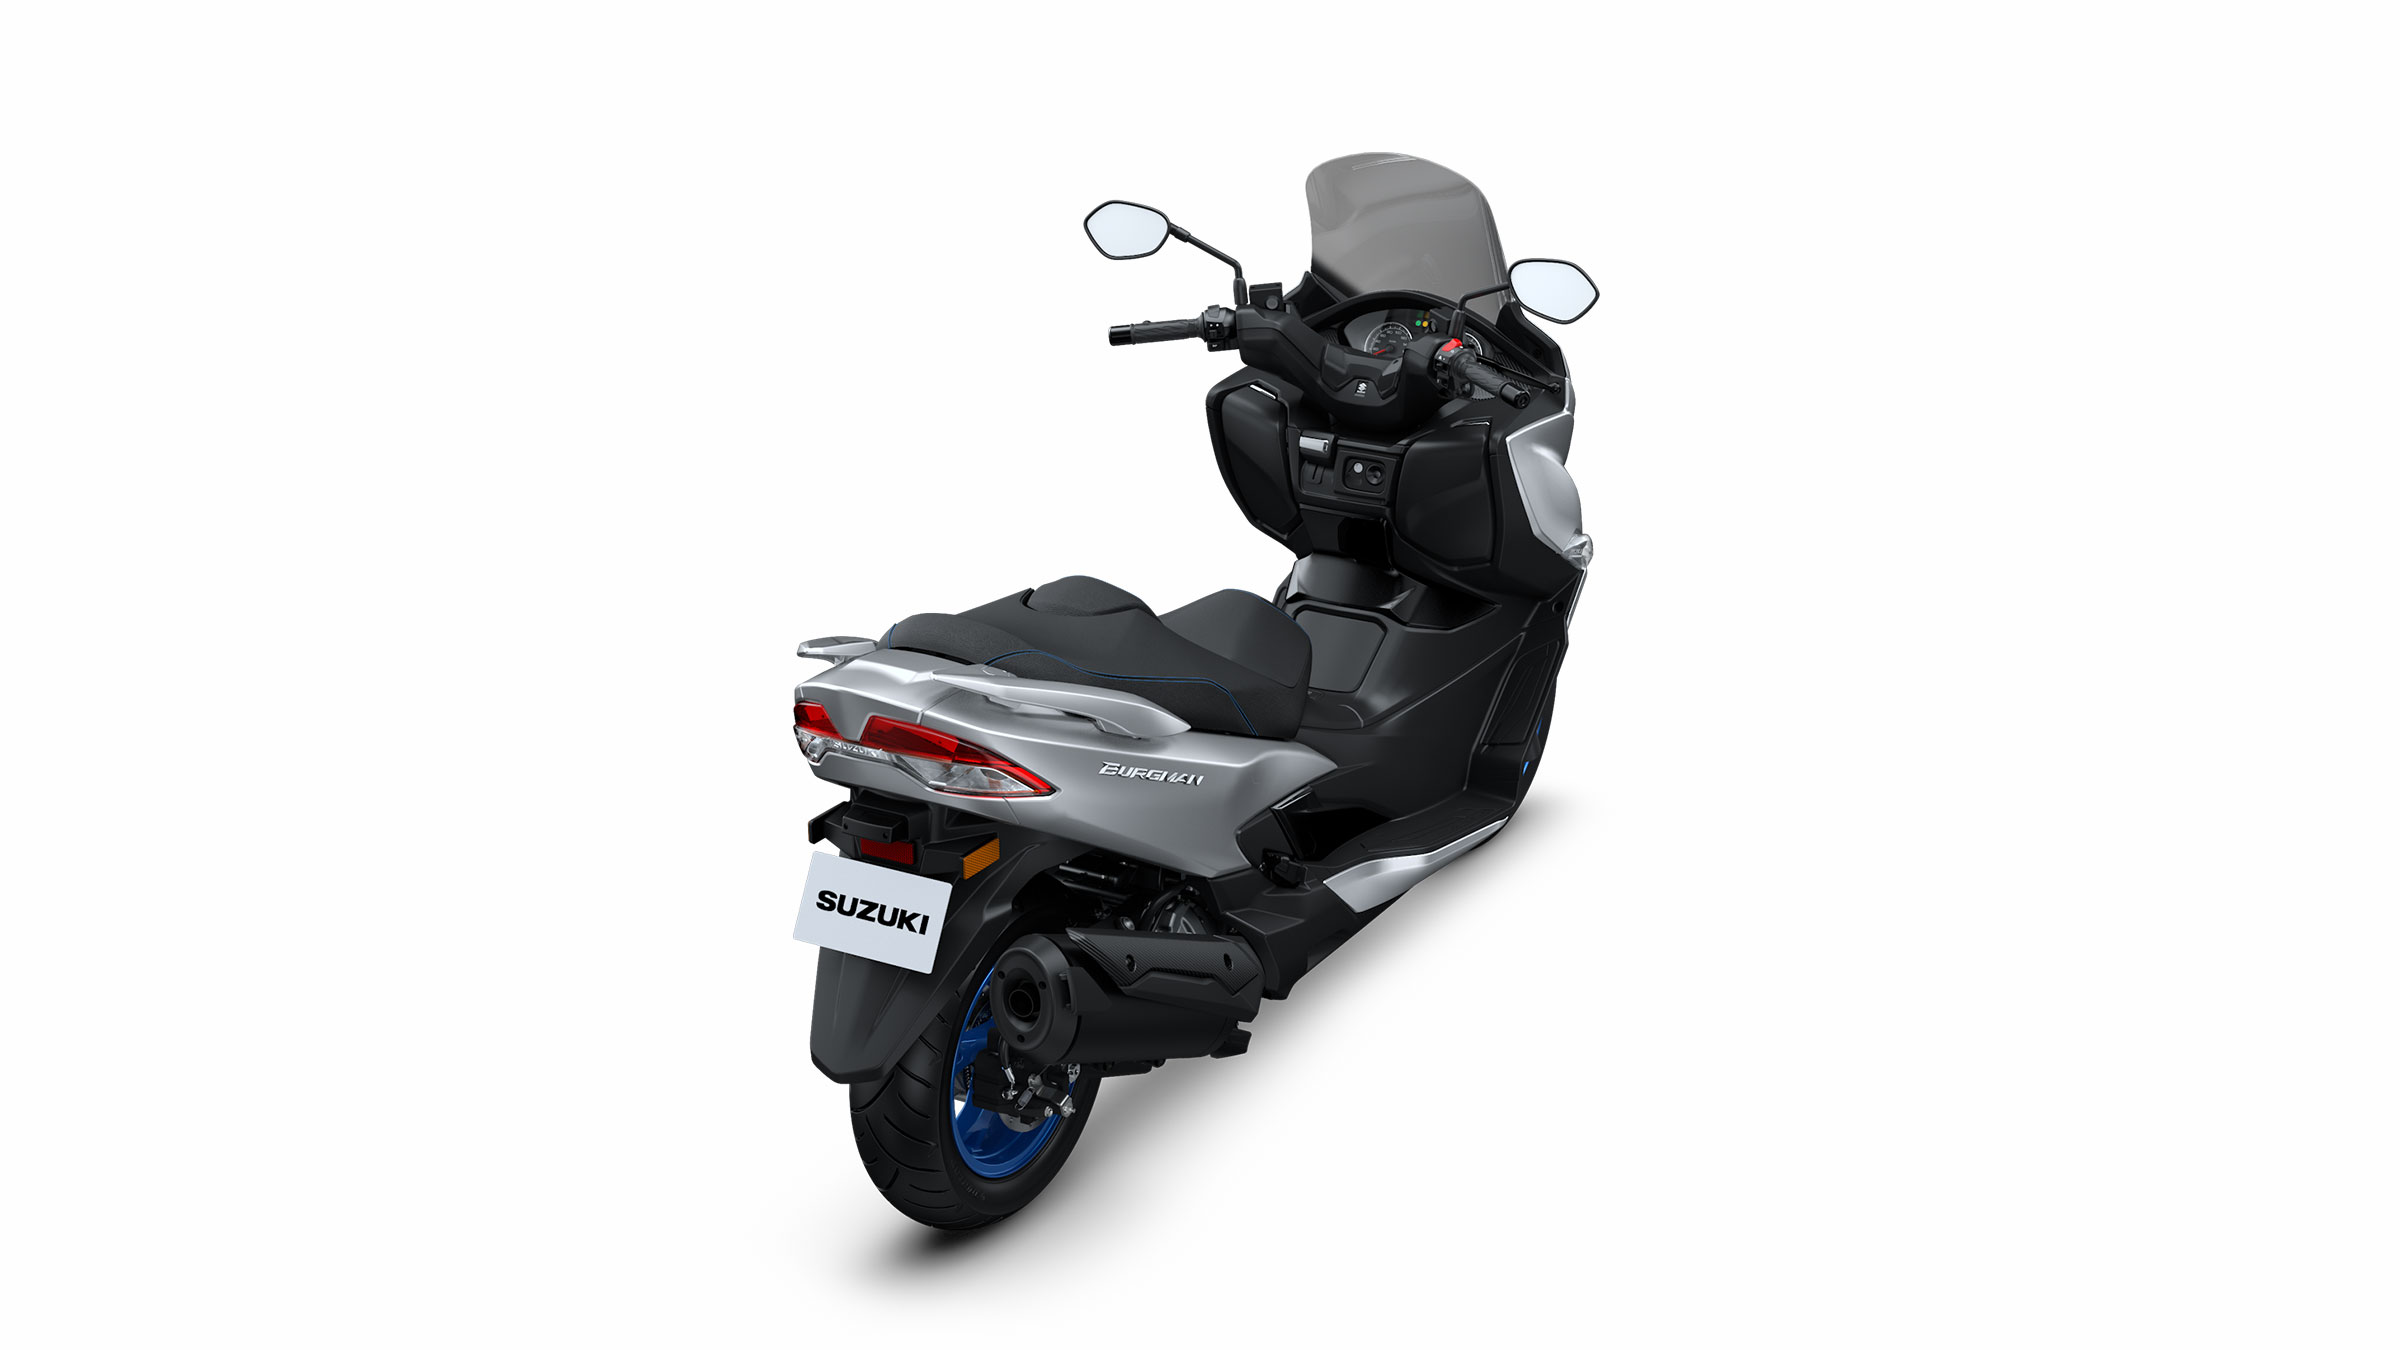 Burgman 400 ABS - Scooter 400 - Scooter - Véhicules - Mondial City